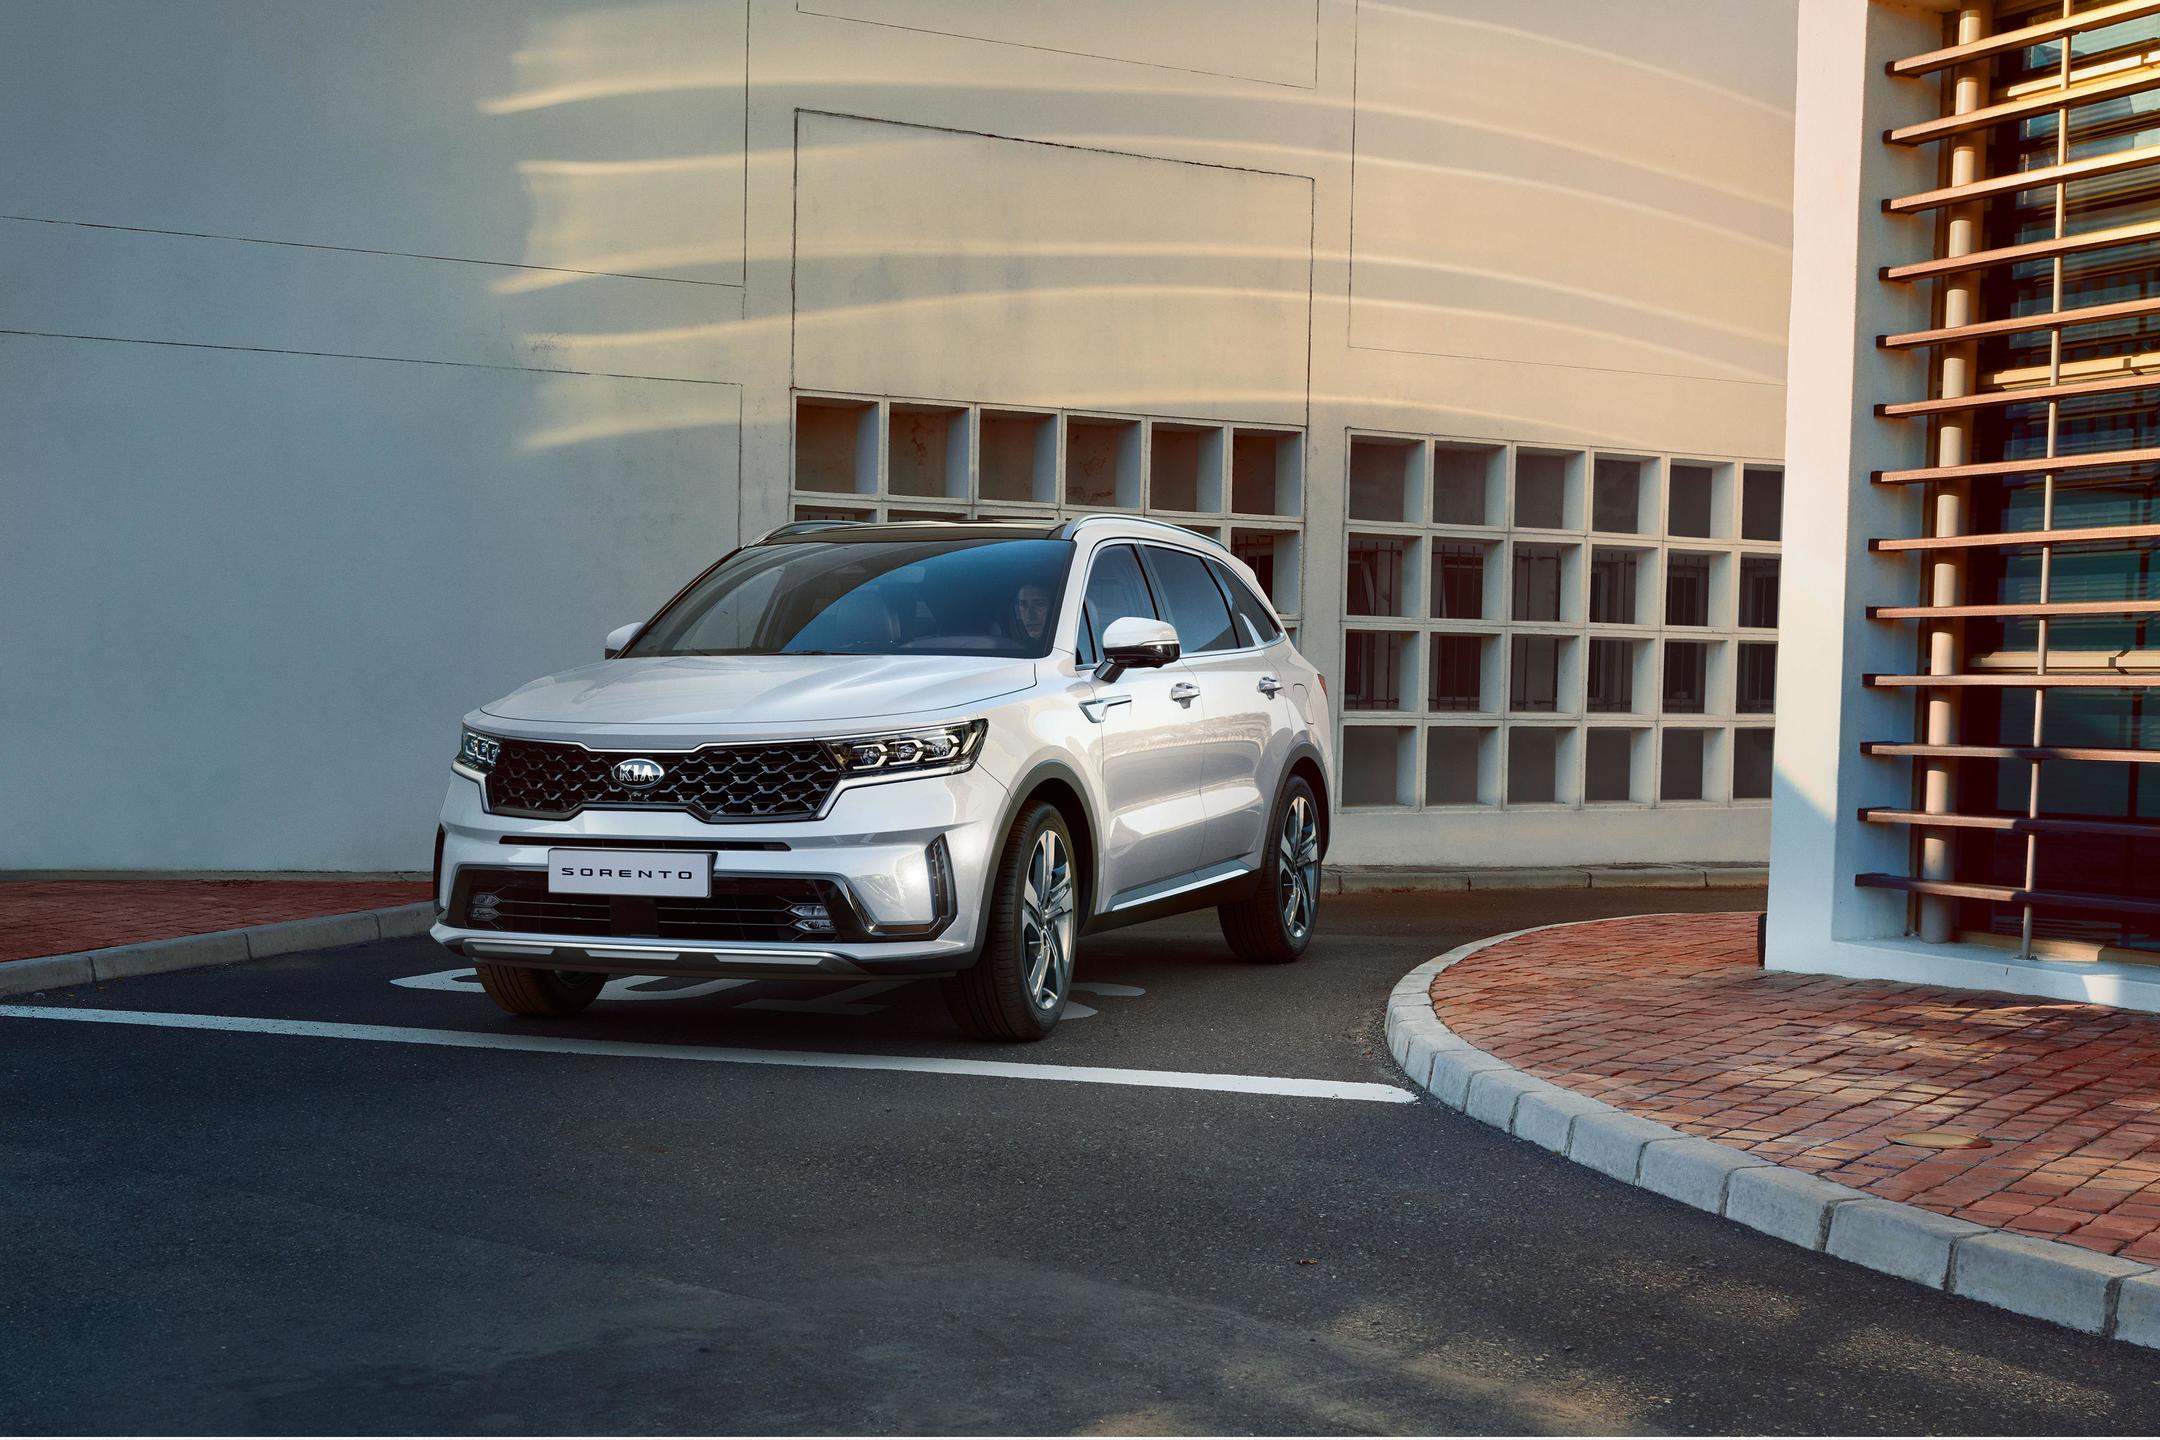 Globally Admired Kia Sorento Lands in Africa and the Middle East